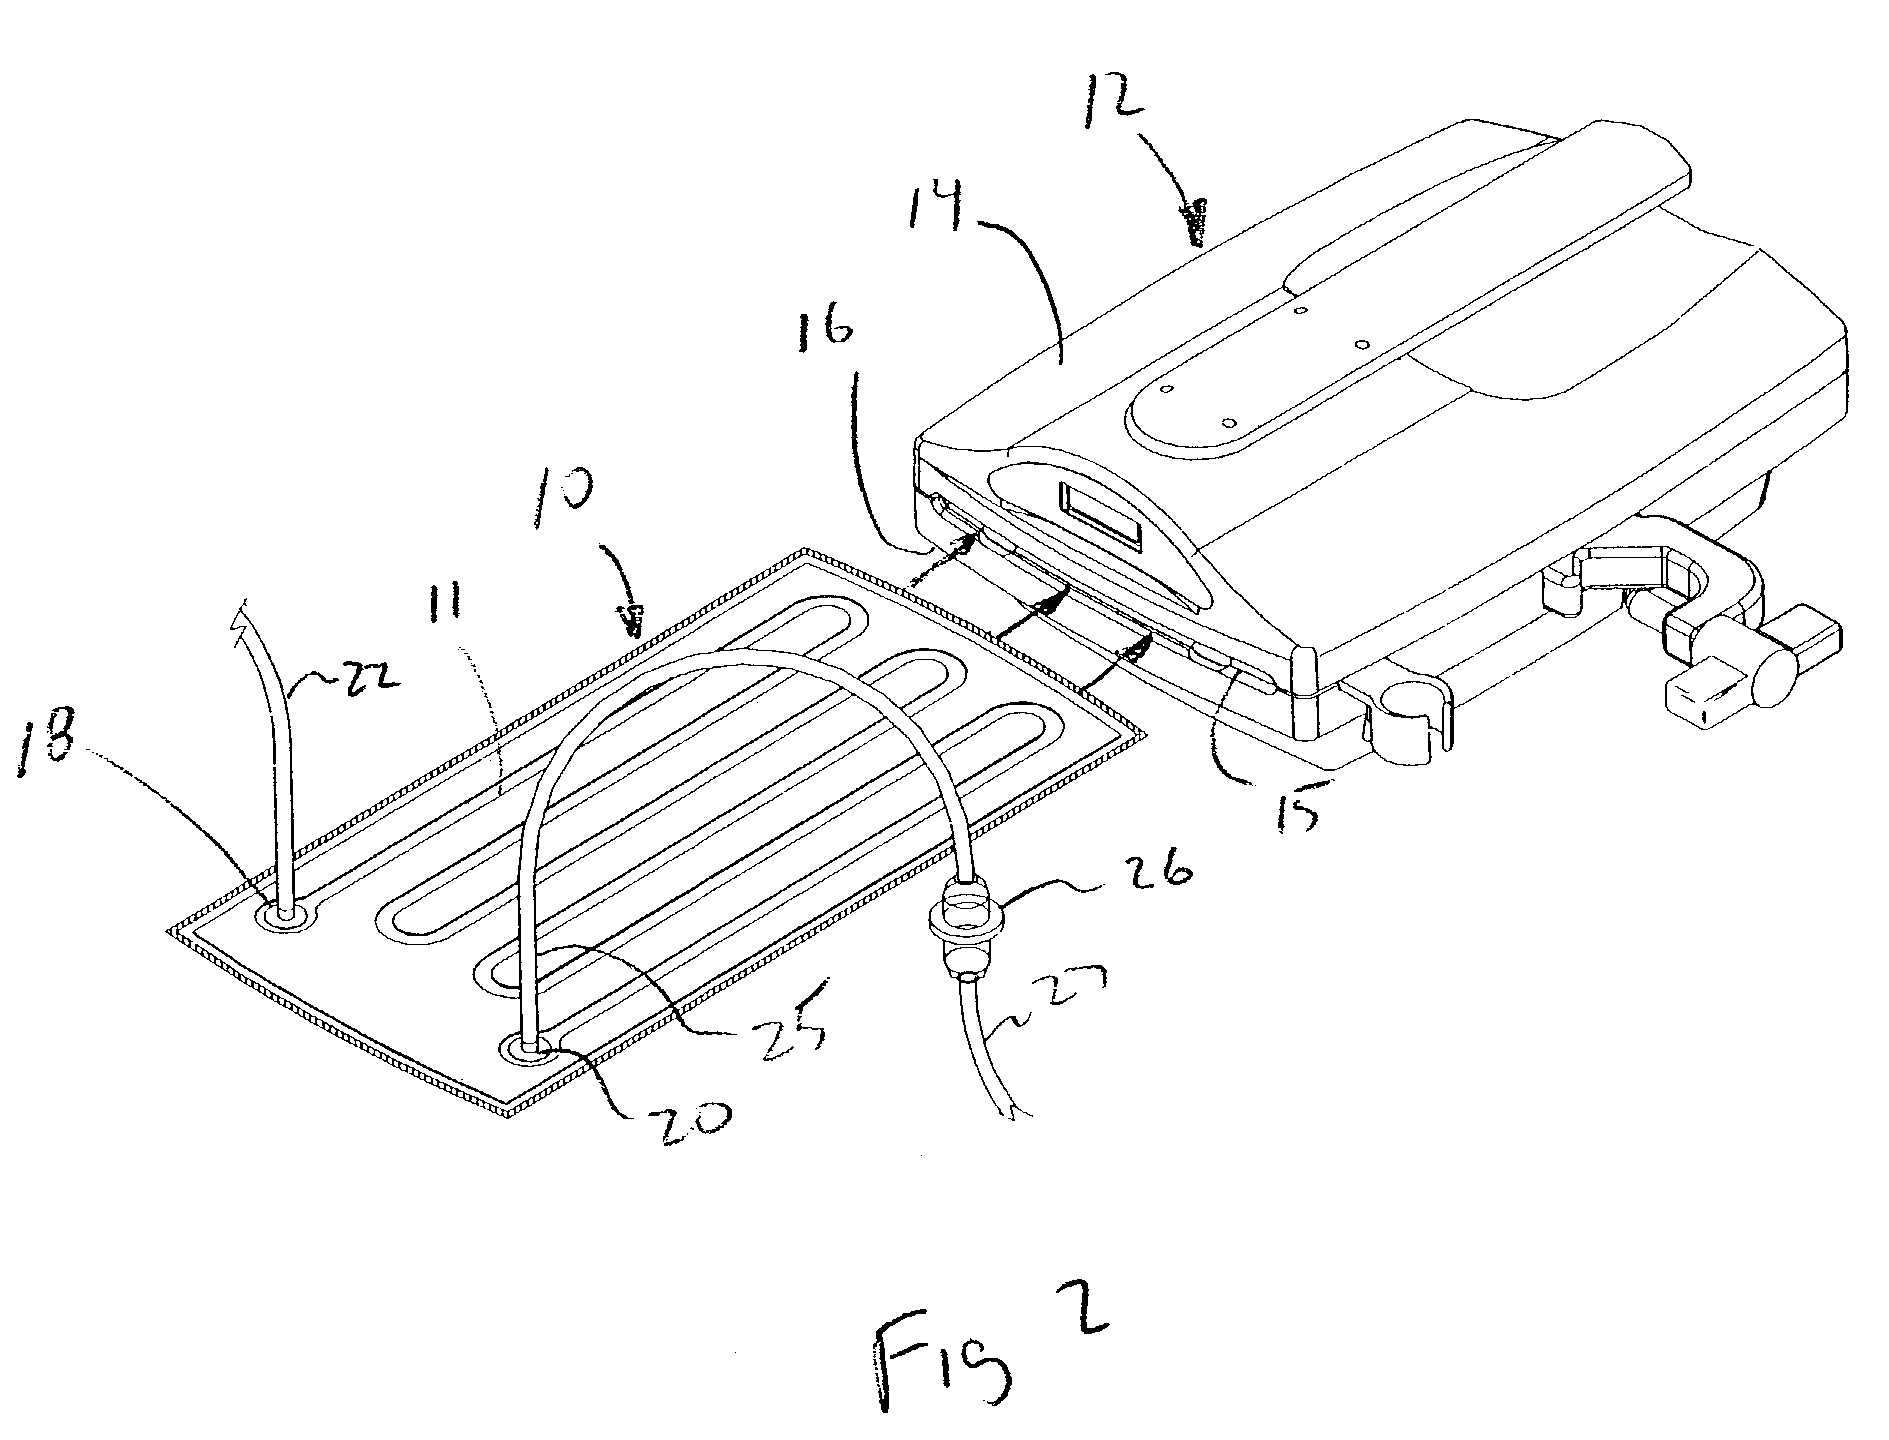 Fluid warming cassette and system capable of operation under negative pressure